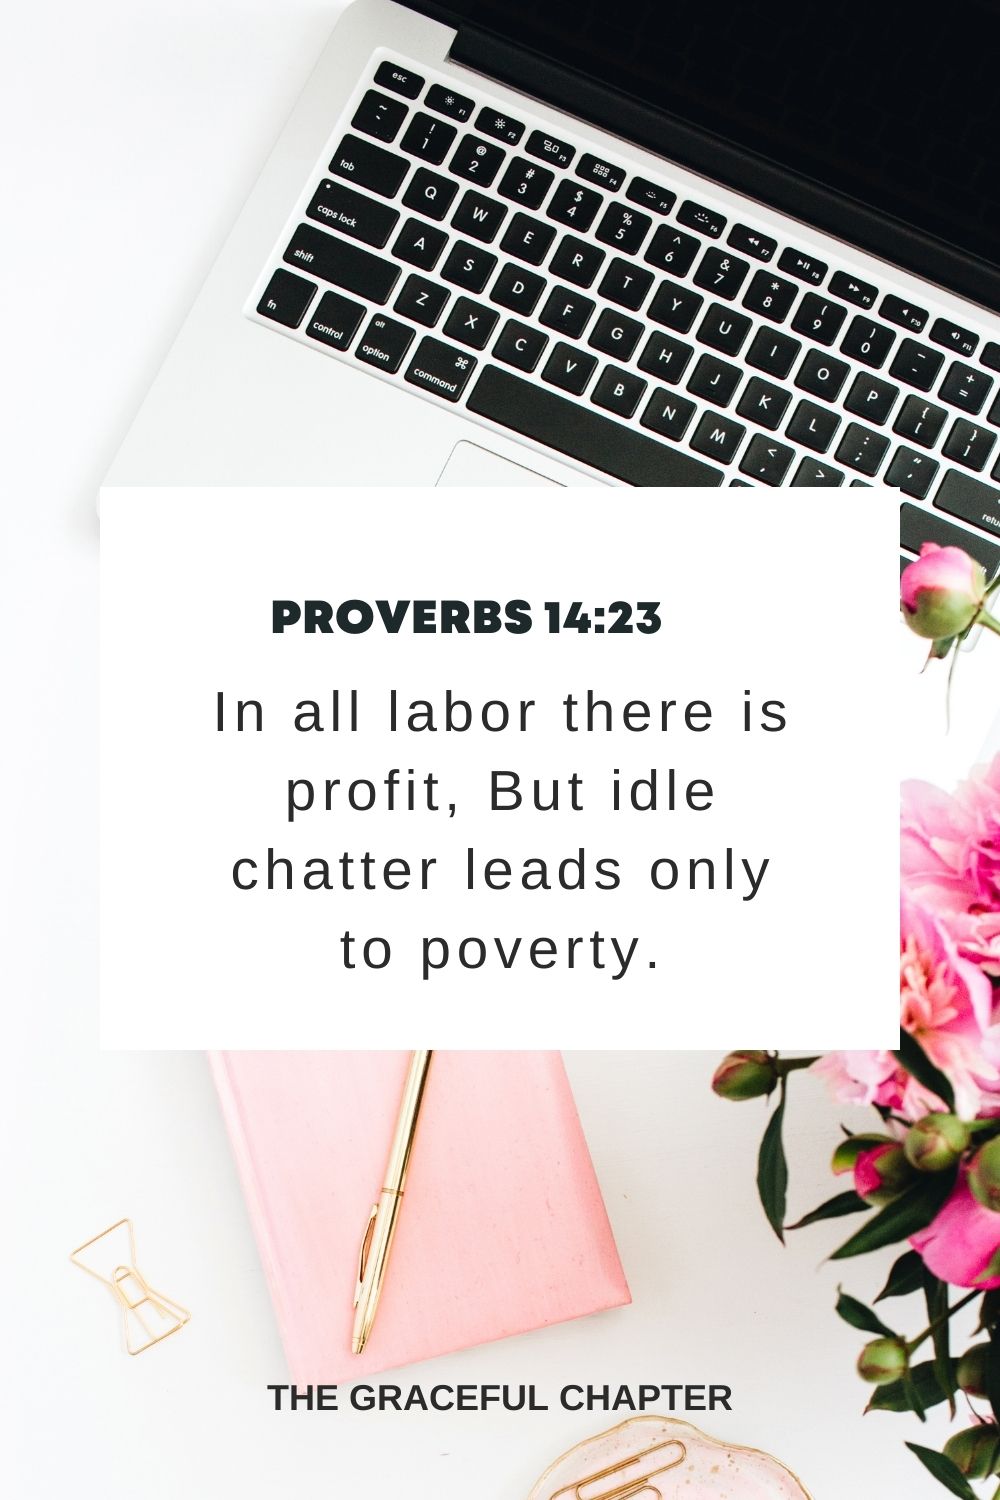 In all labor there is profit, But idle chatter leads only to poverty. Proverbs 14:23